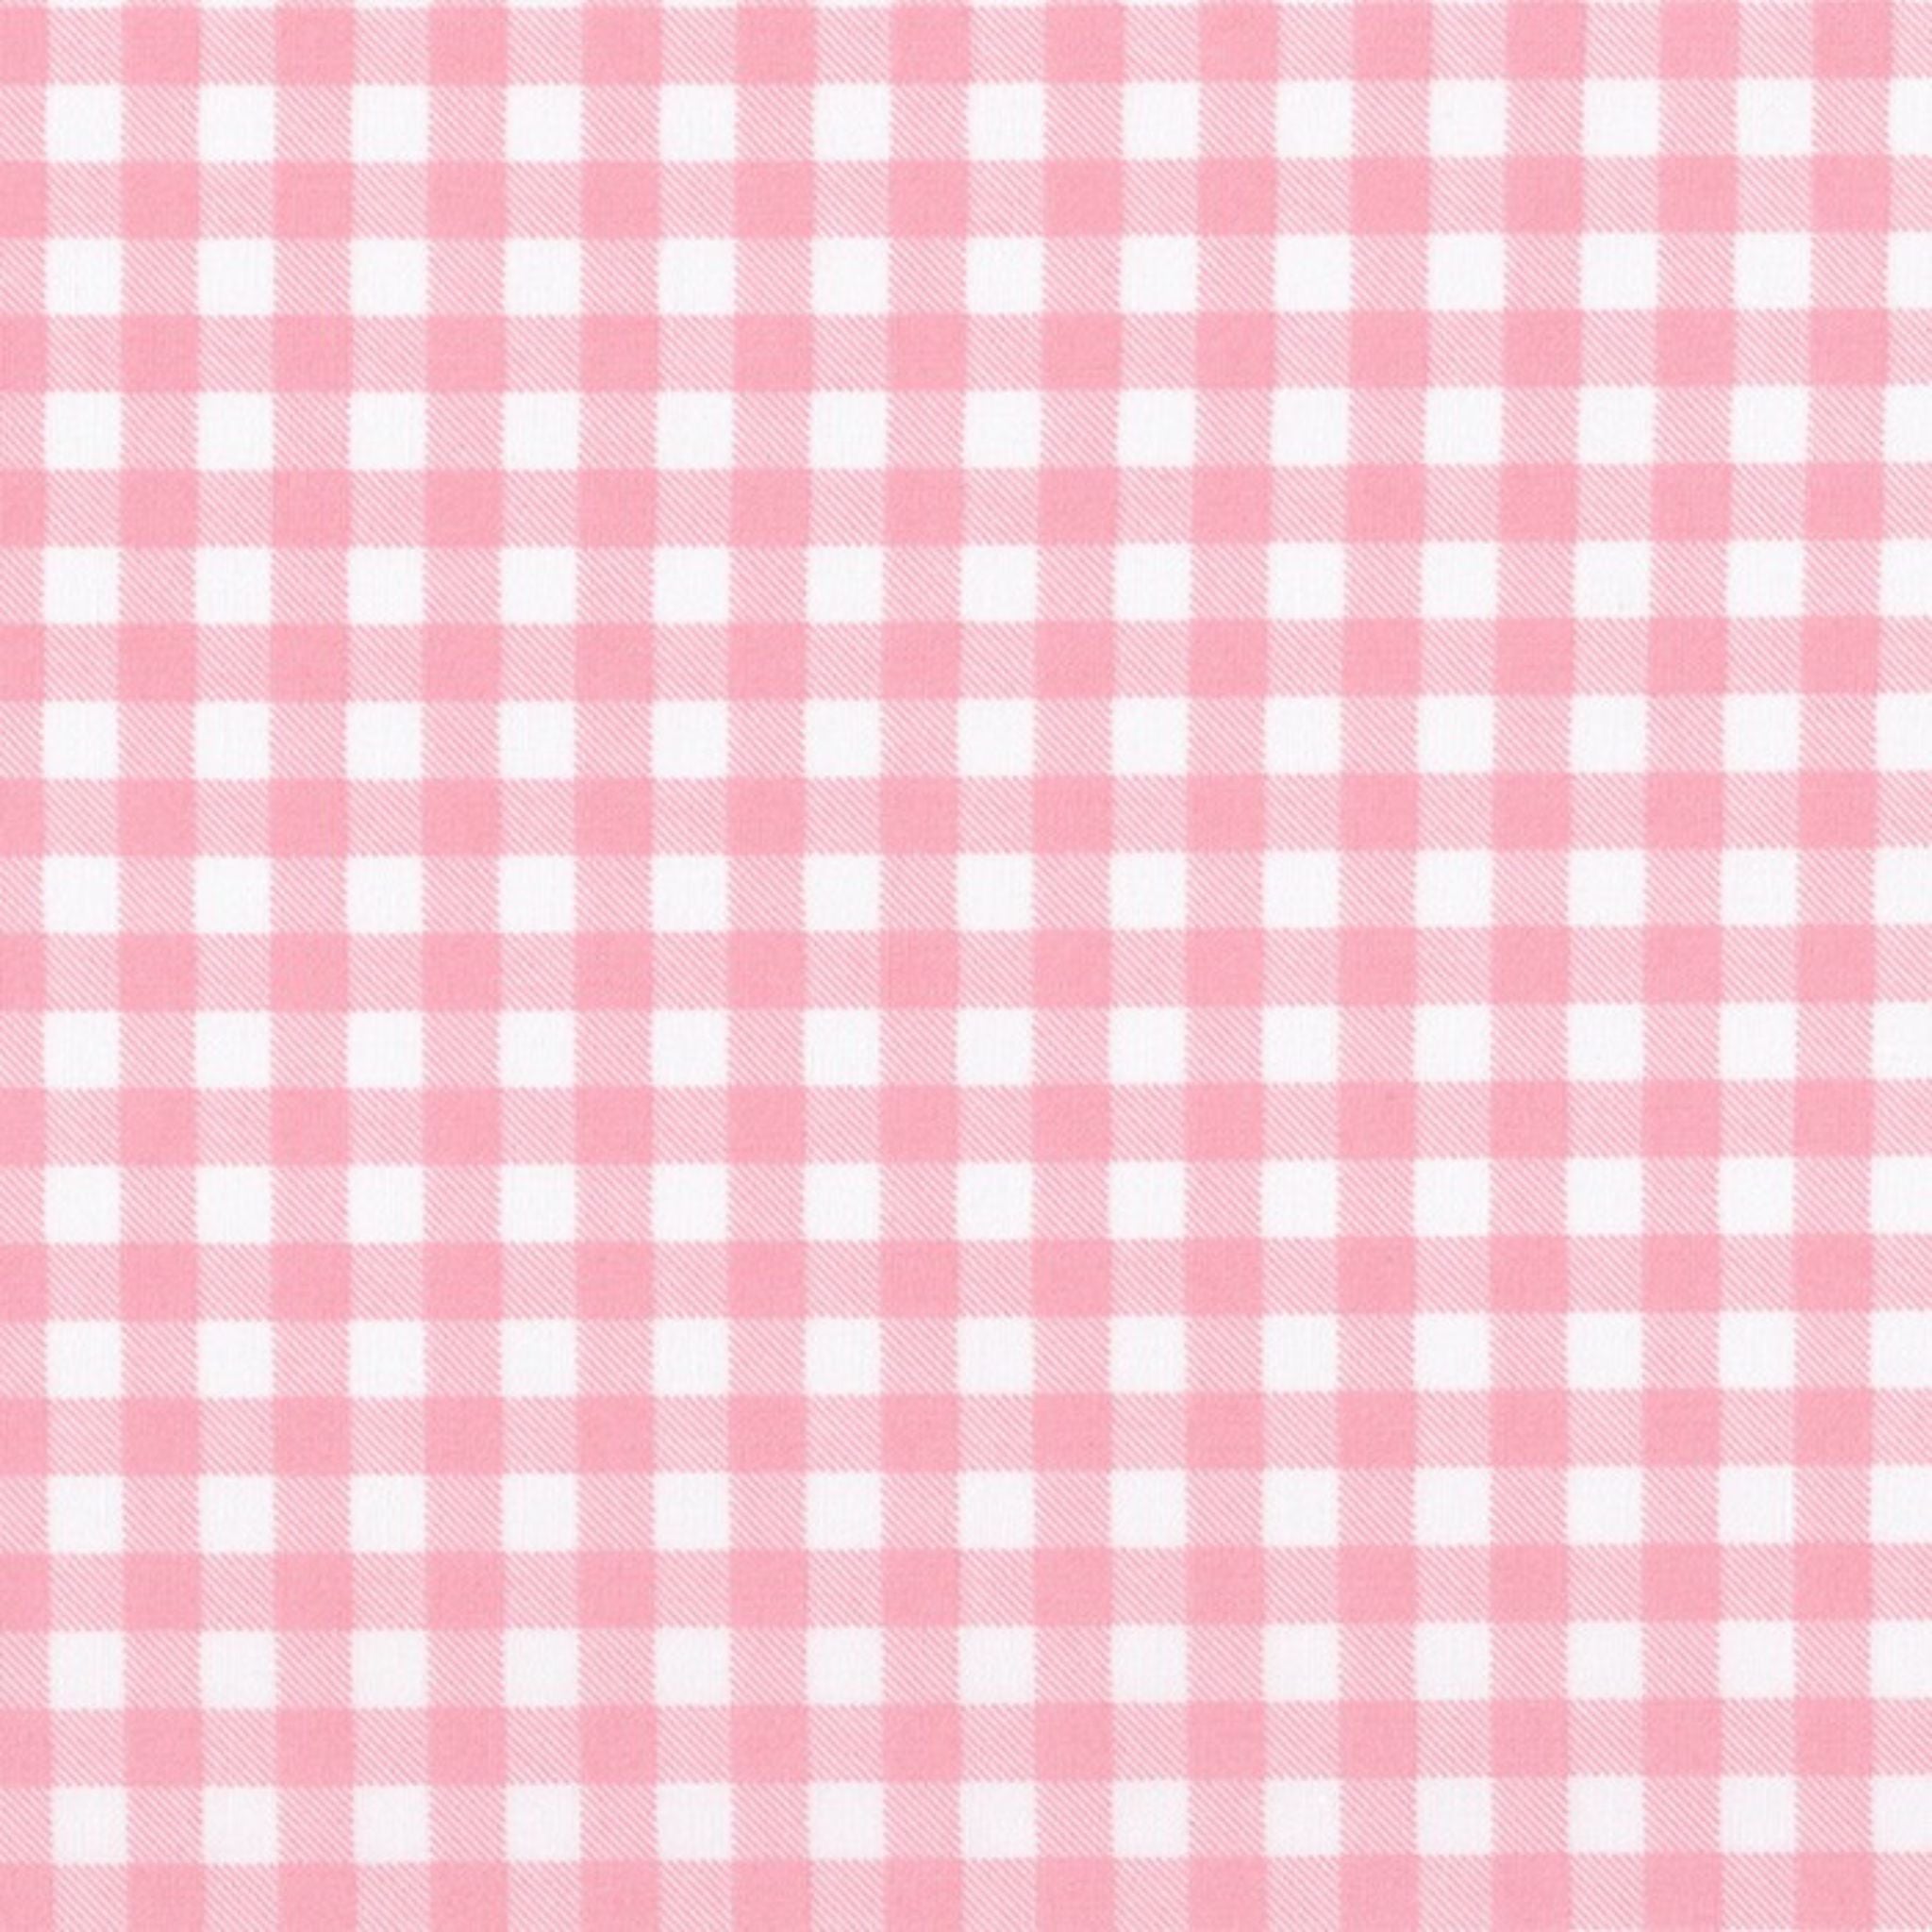 pink gingham cotton fabric 1/4 inch - Sevenberry 